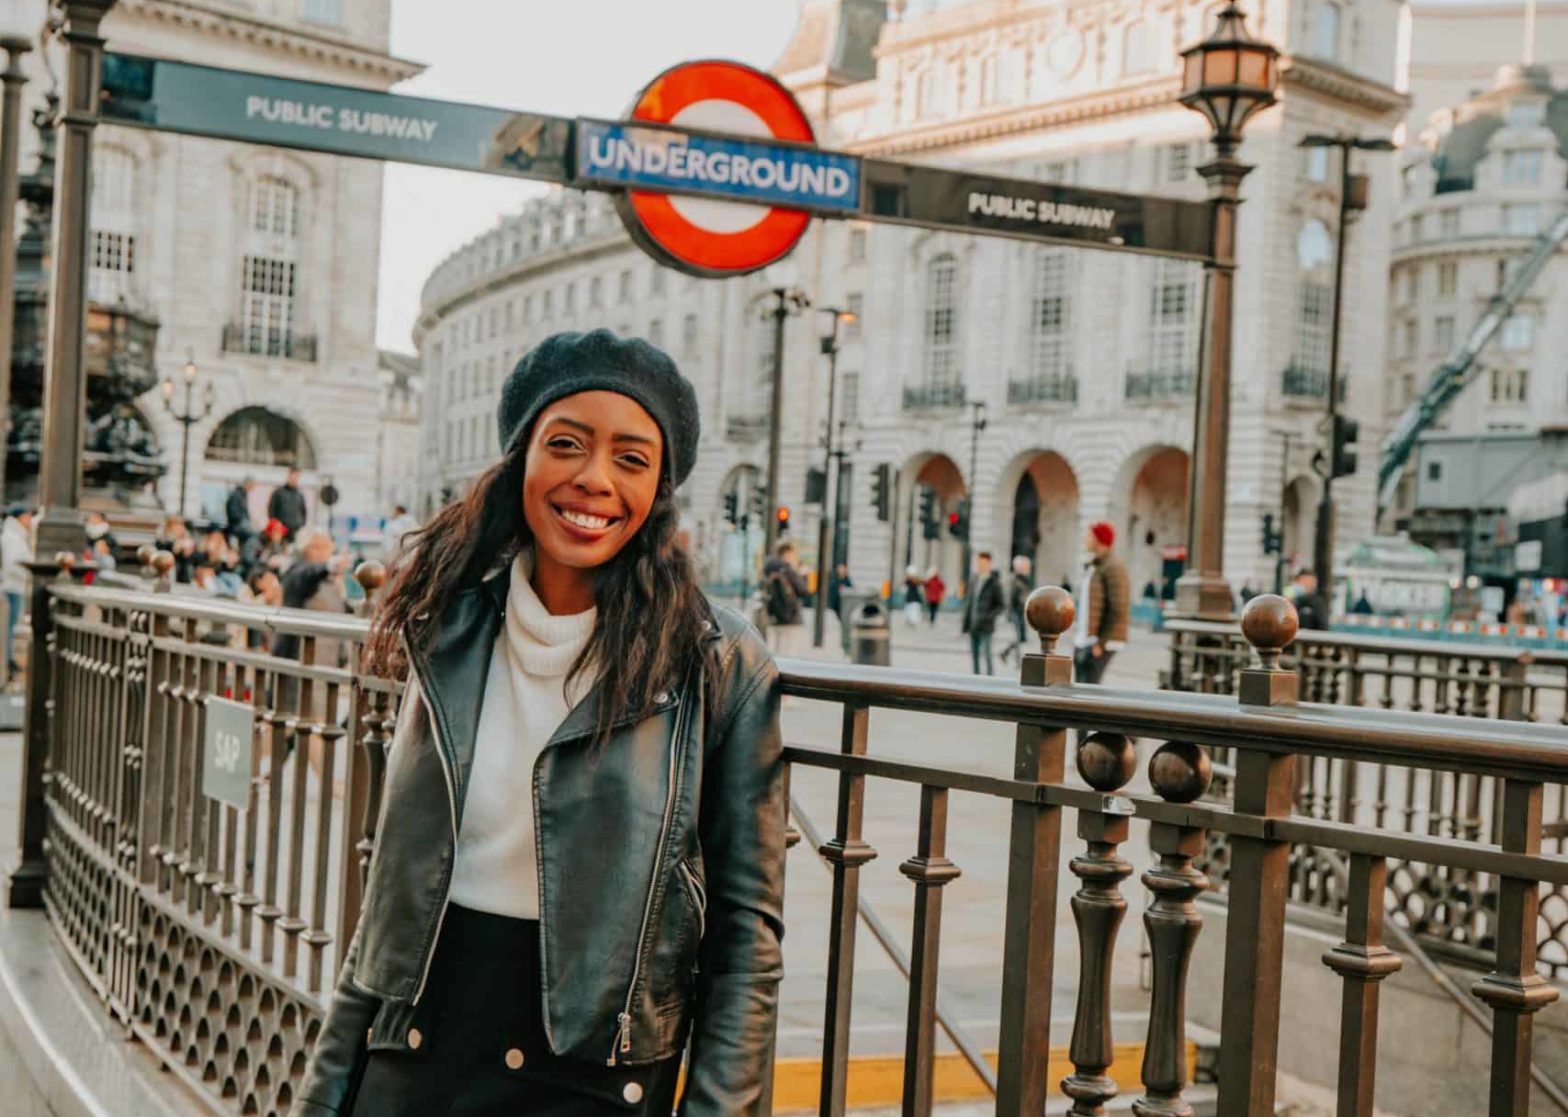 The Black Expat in London: I Moved From The U.S. To London And Empower Women To Move Abroad